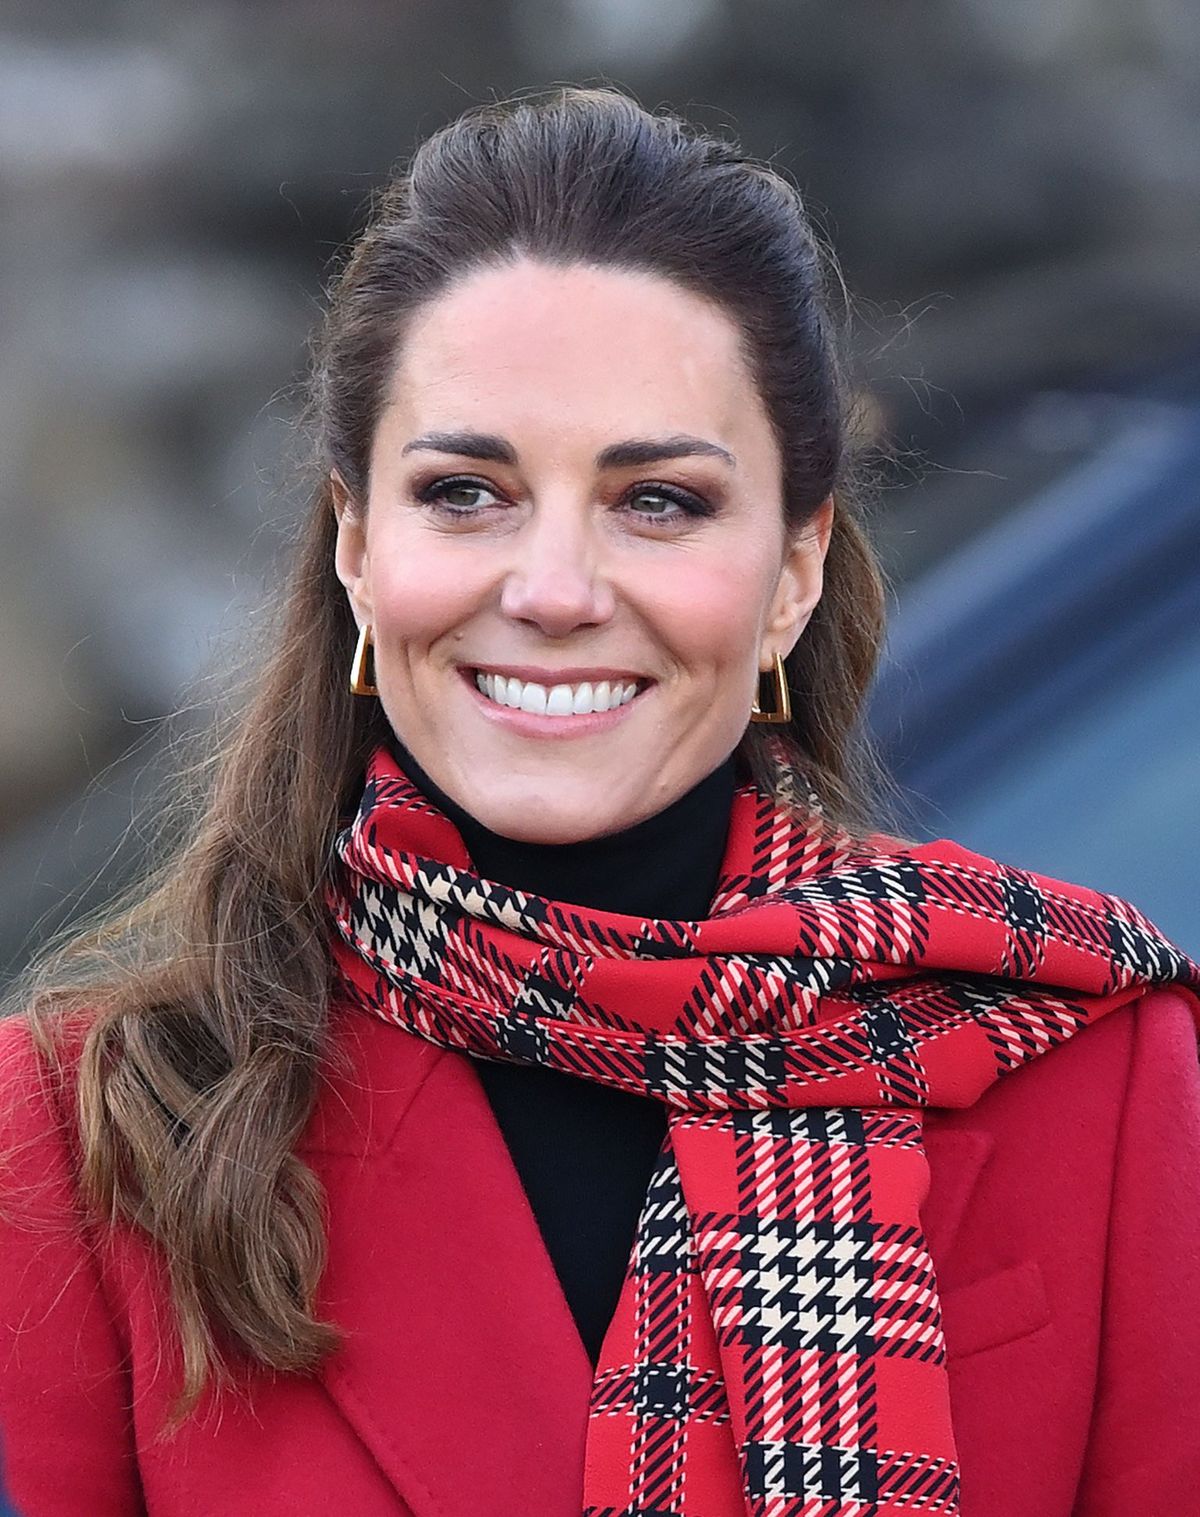 Kate Middleton December 8, 2020 in Cardiff, Wales | Getty Images